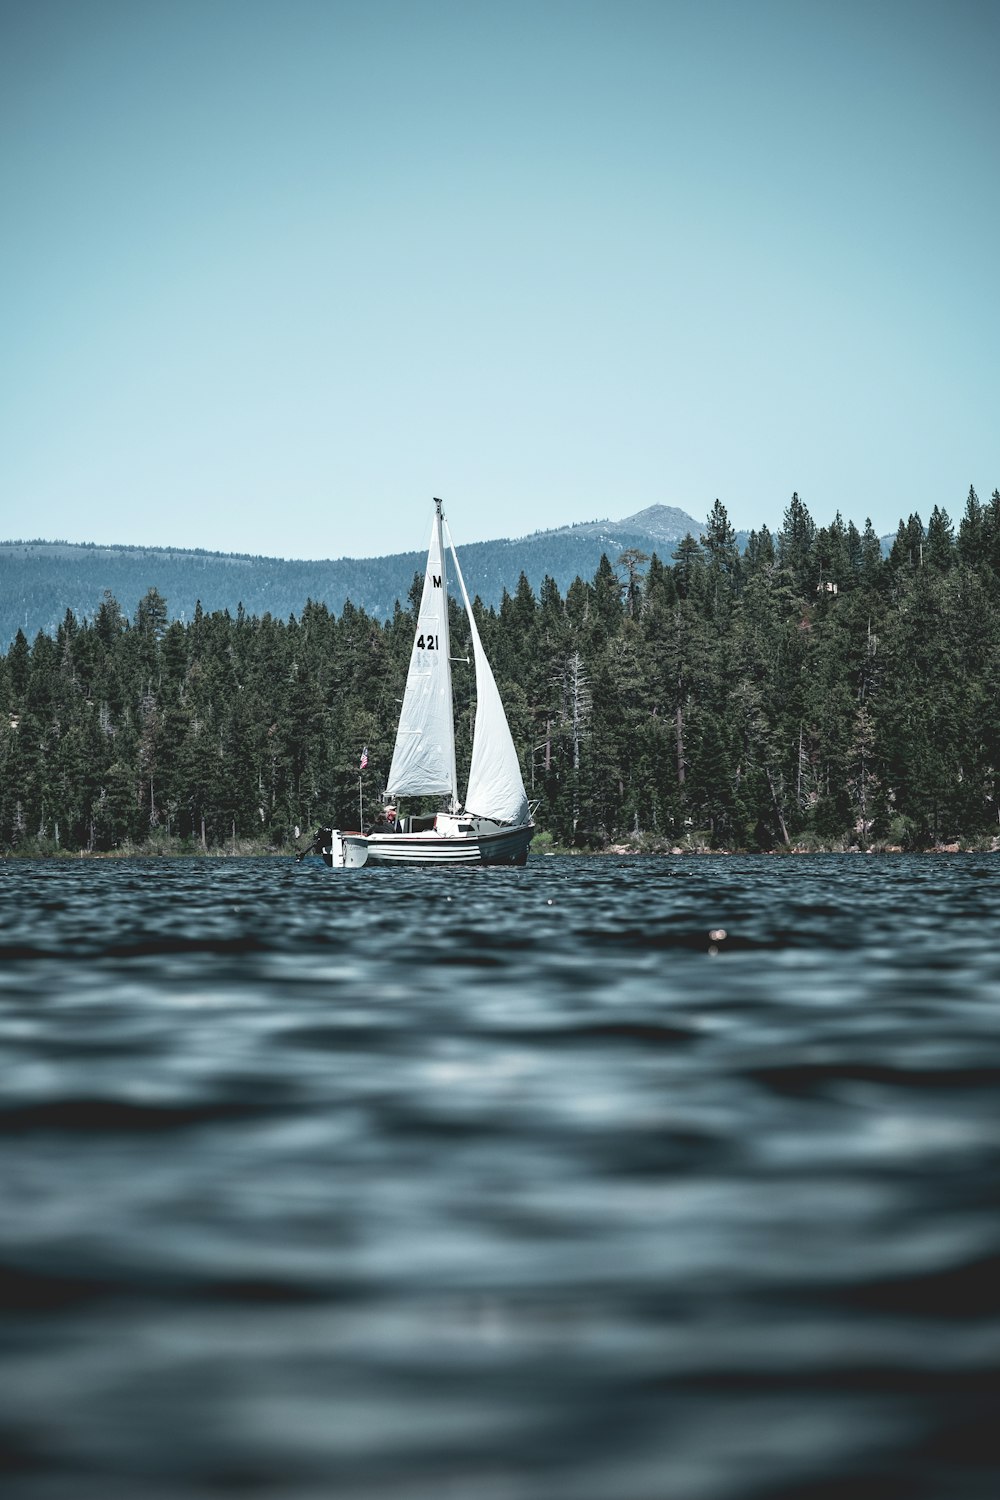 white and black sailboat on body of water near green high trees and mountain under blue sky at daytime